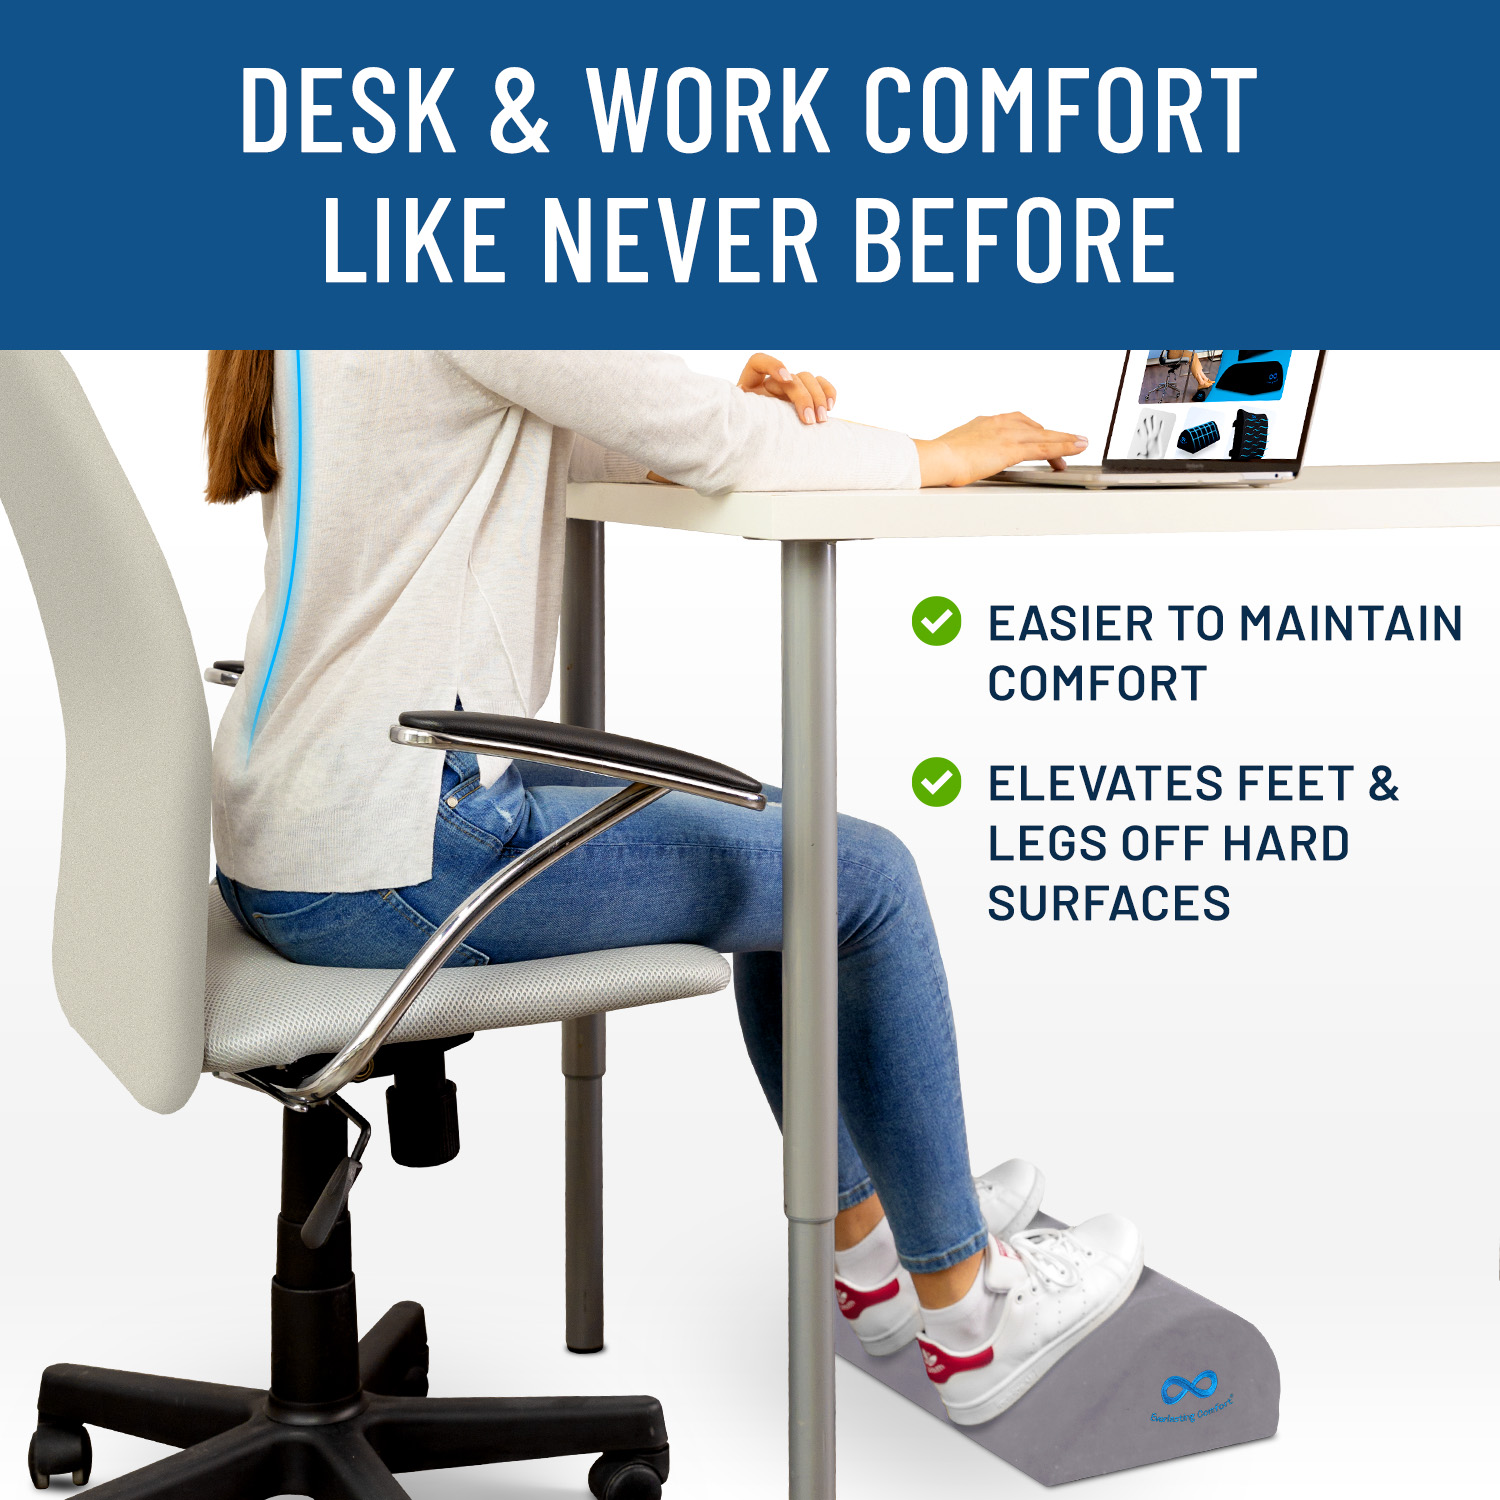 Everlasting Comfort Foot Rest for Under Desk - Kick up Your feet, Improve Circulation - Work from Home Memory Foam Footrest Pillow - Foot Stool for Office, Home, Gaming, Computer Accessories (Gray) - image 5 of 8